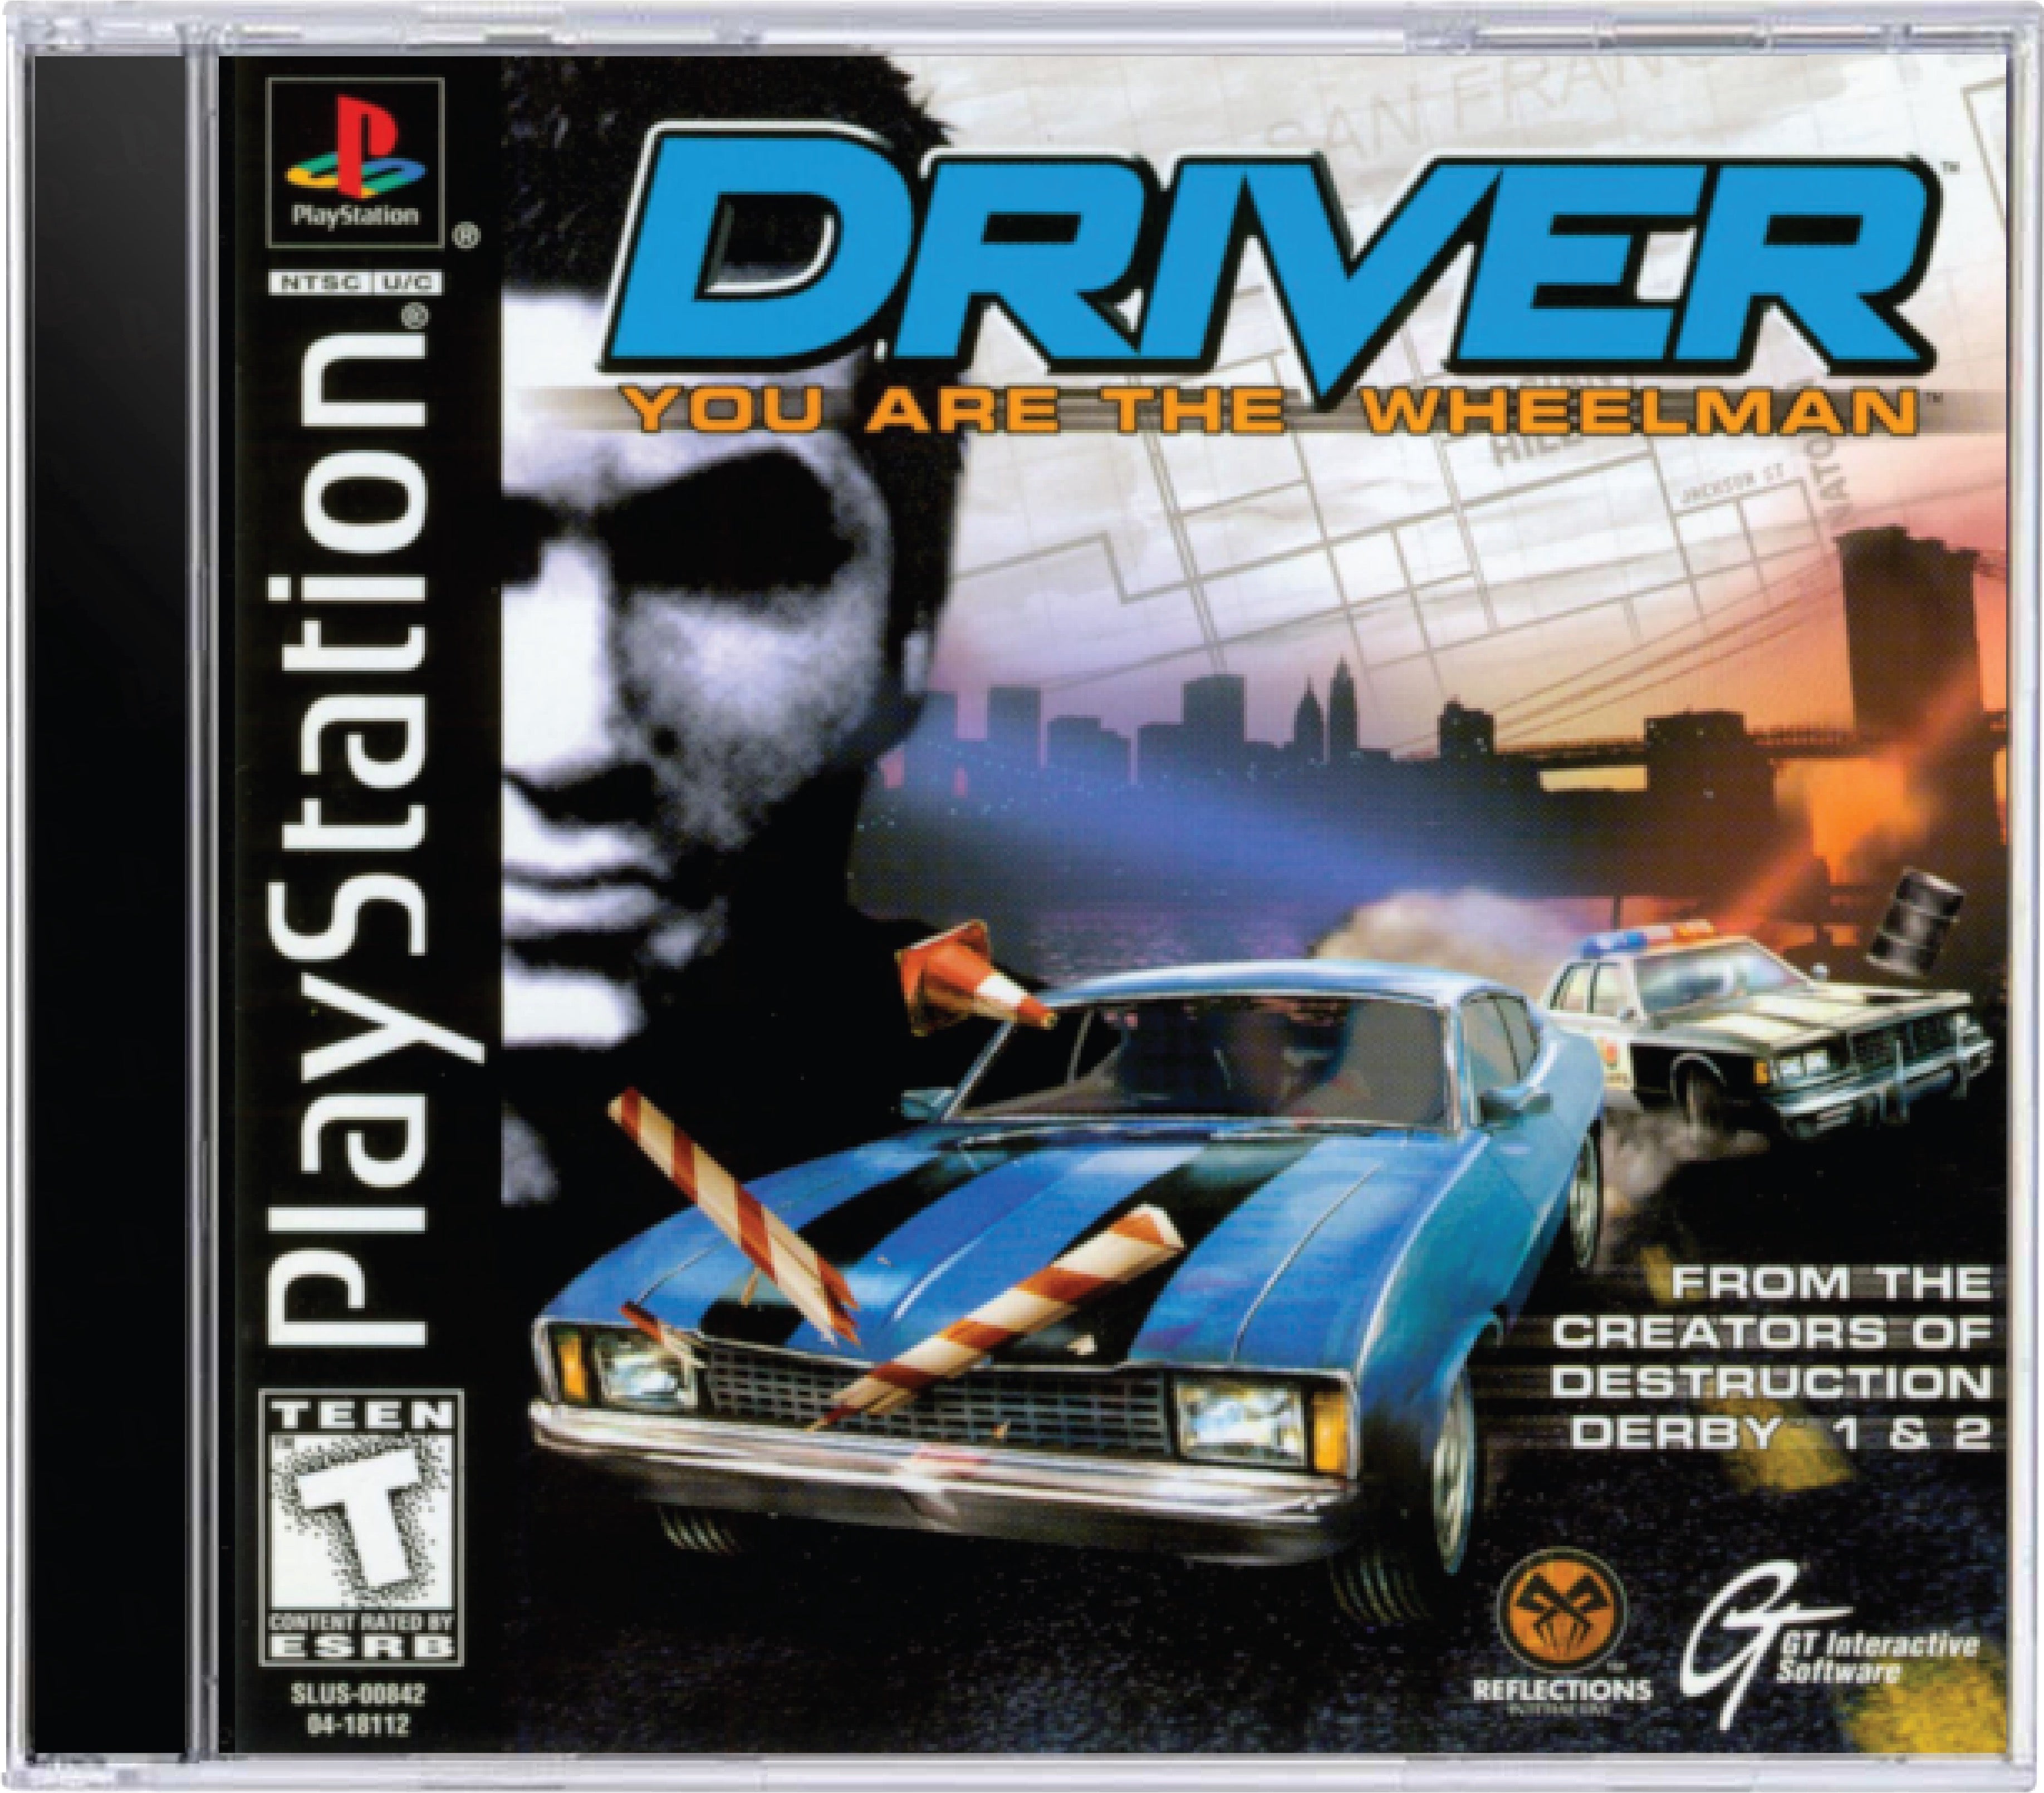 Driver Cover Art and Product Photo